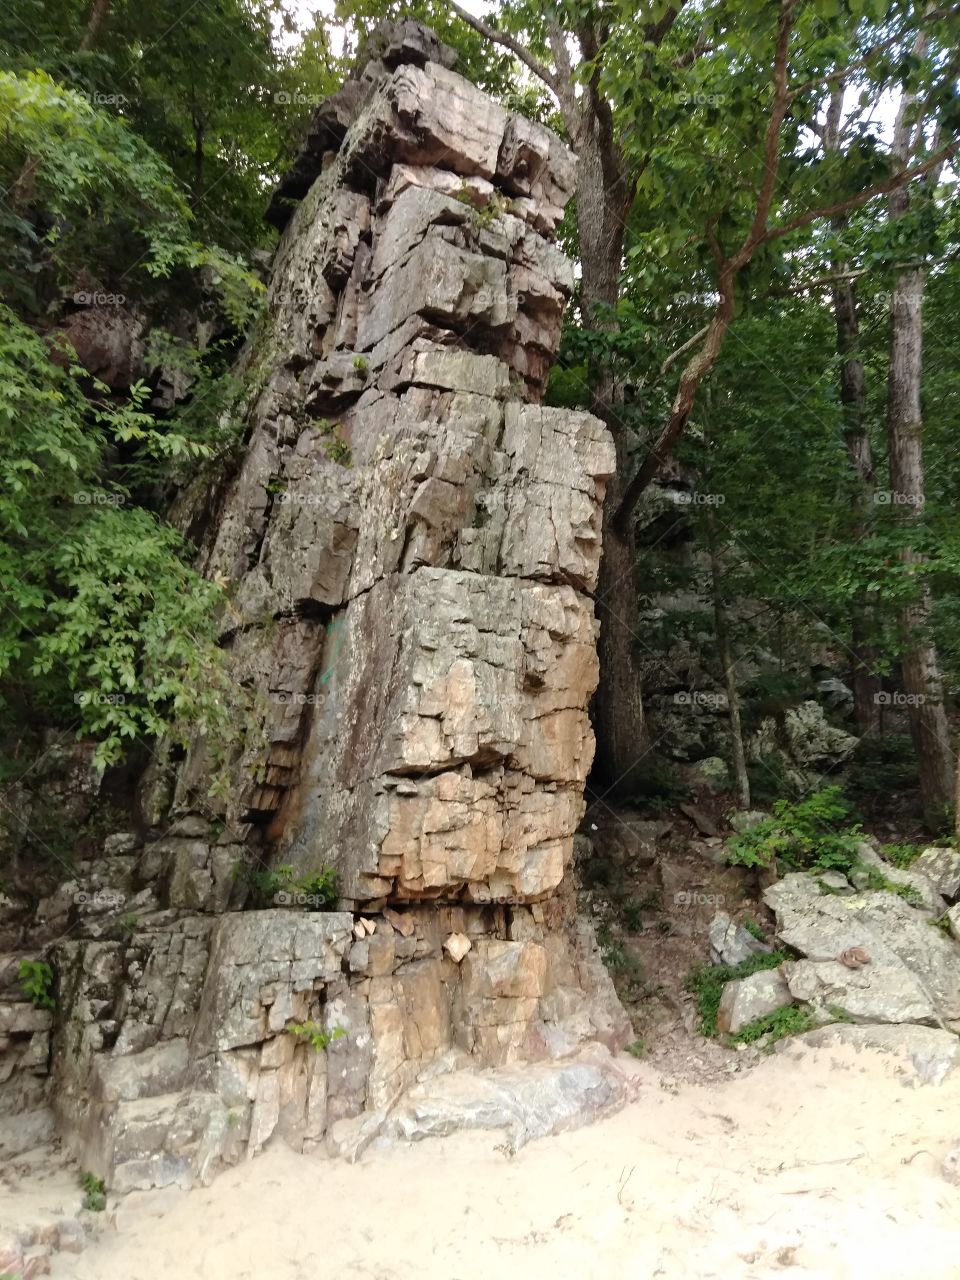 Awesome looking rock formation.